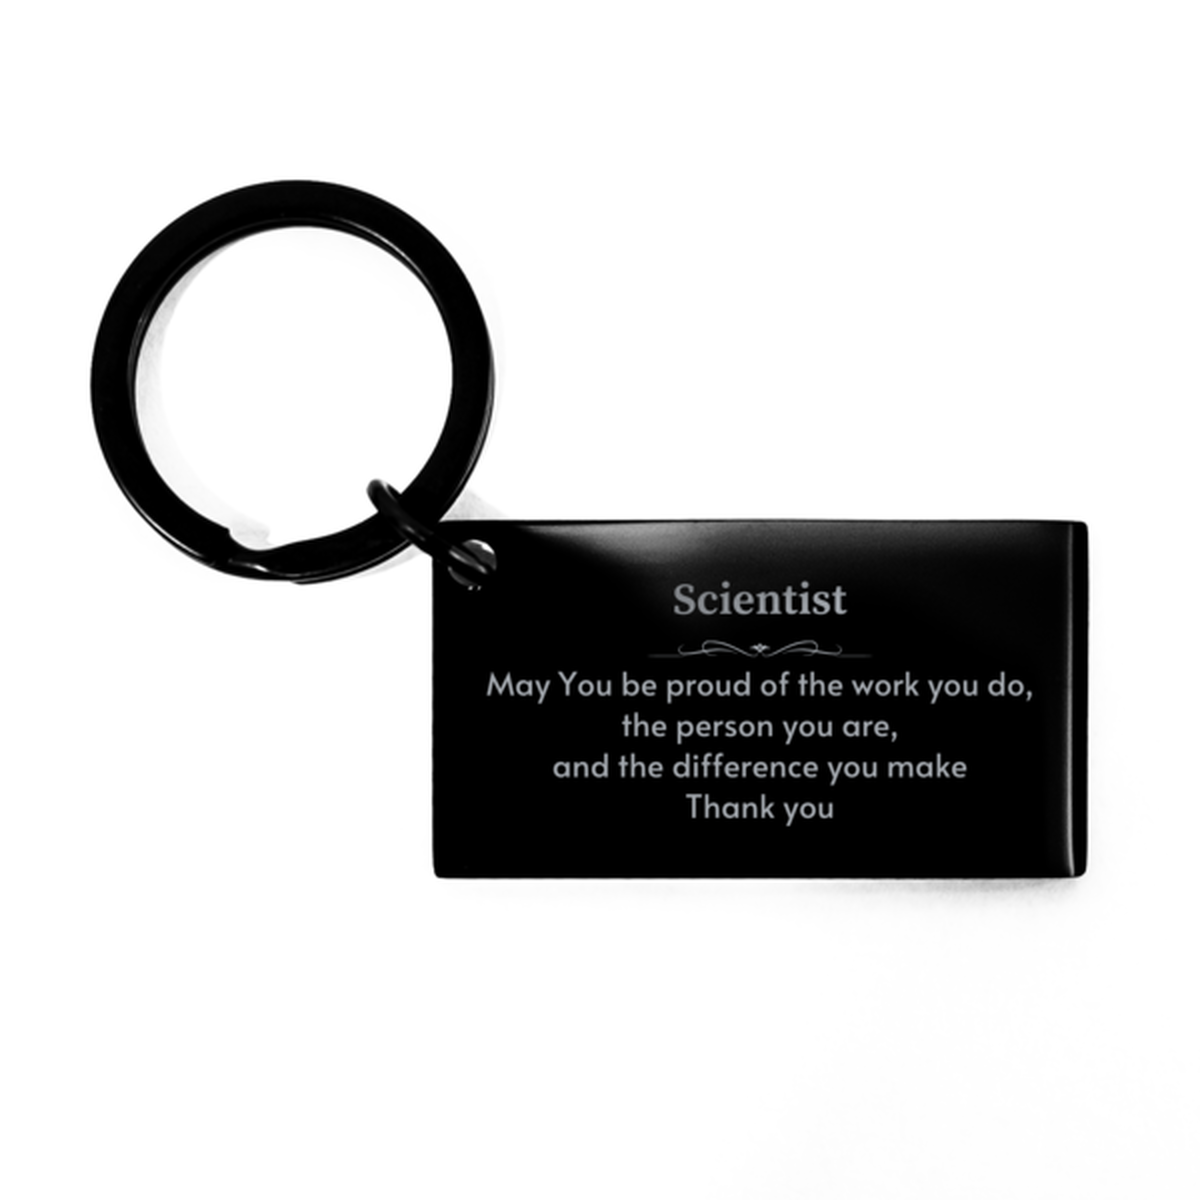 Heartwarming Keychain Retirement Coworkers Gifts for Scientist, Truck Driver May You be proud of the work you do, the person you are Gifts for Boss Men Women Friends